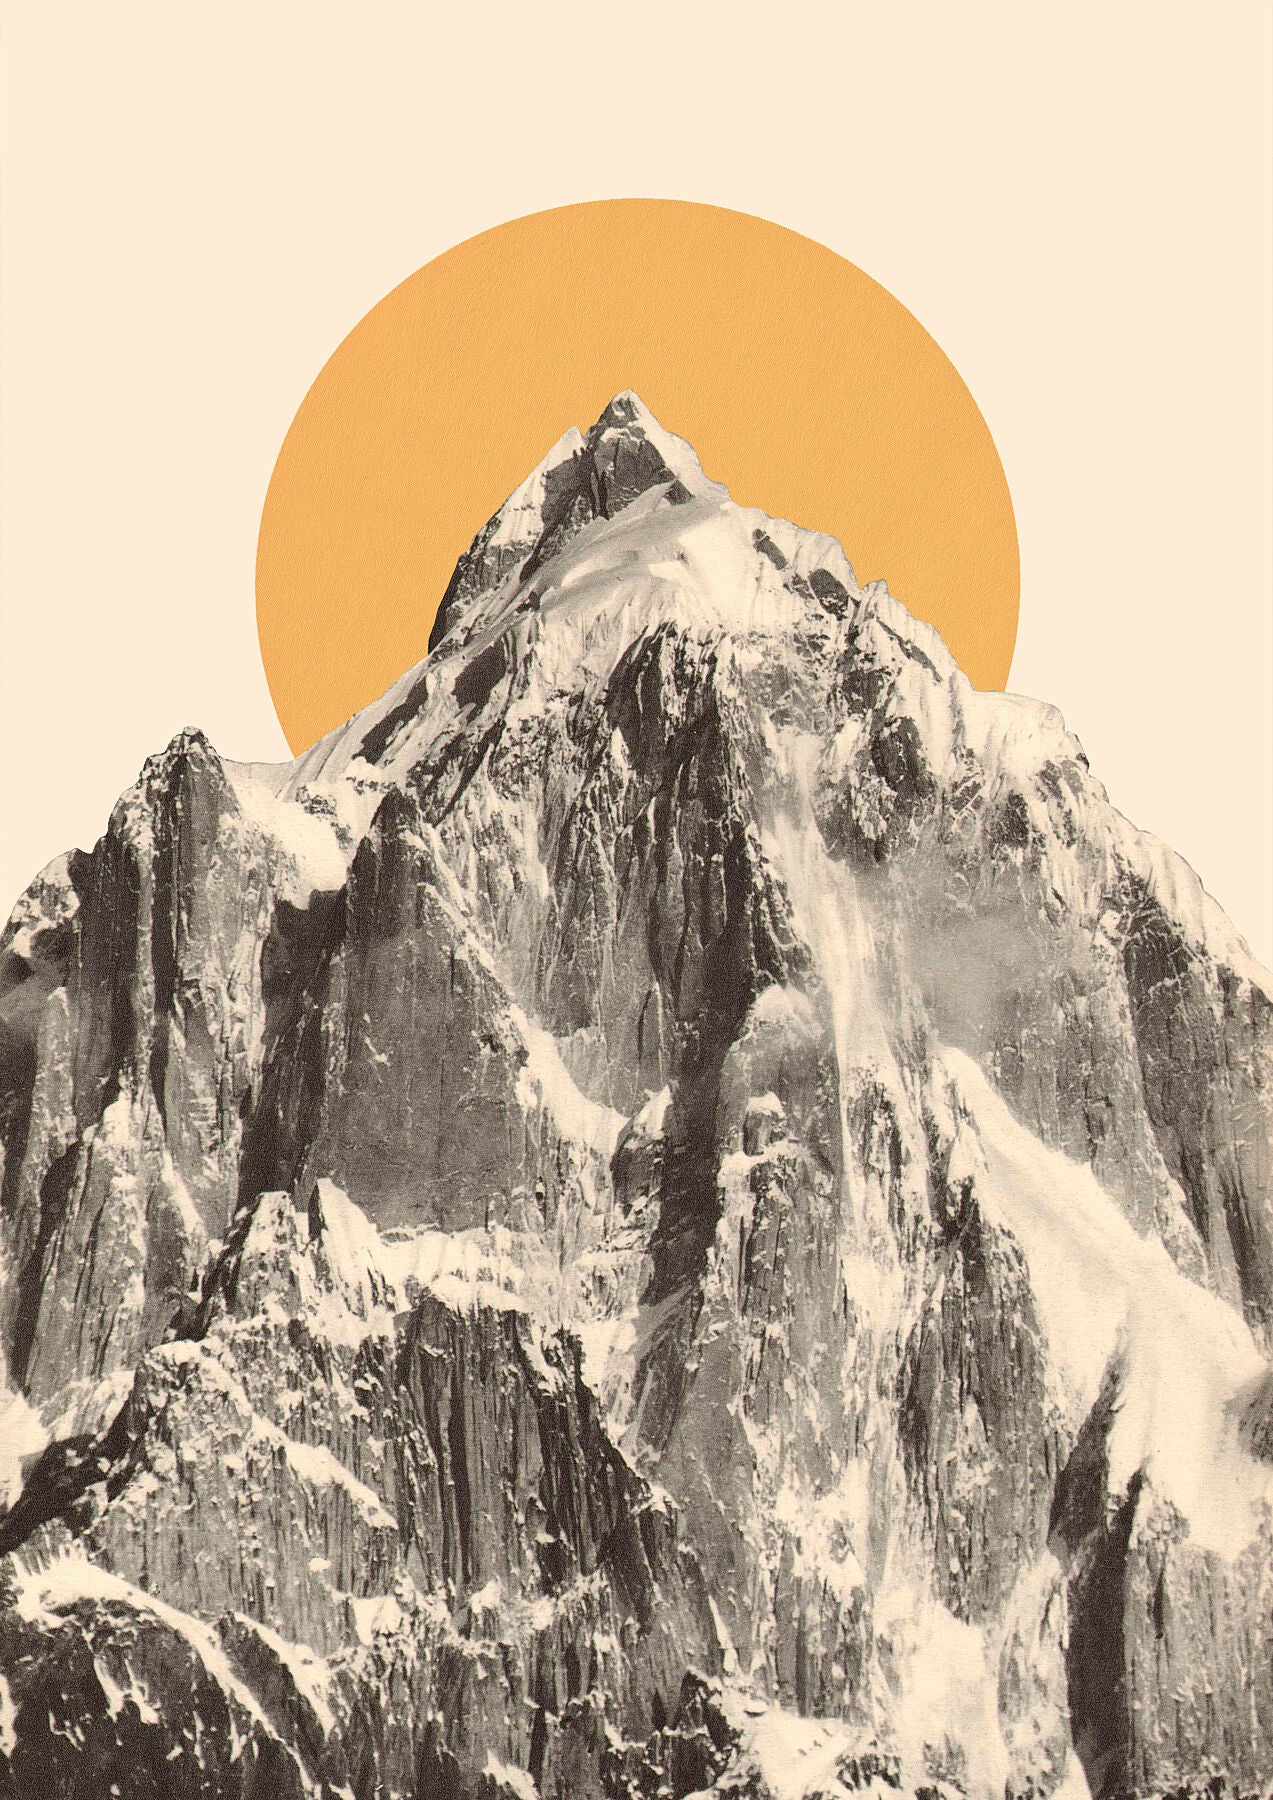 'Mountainscape 5, 2019' by Florent Bodart, an Unframed archival print capturing a serene black and white mountain peak set against a round yellow sun on a cream background.